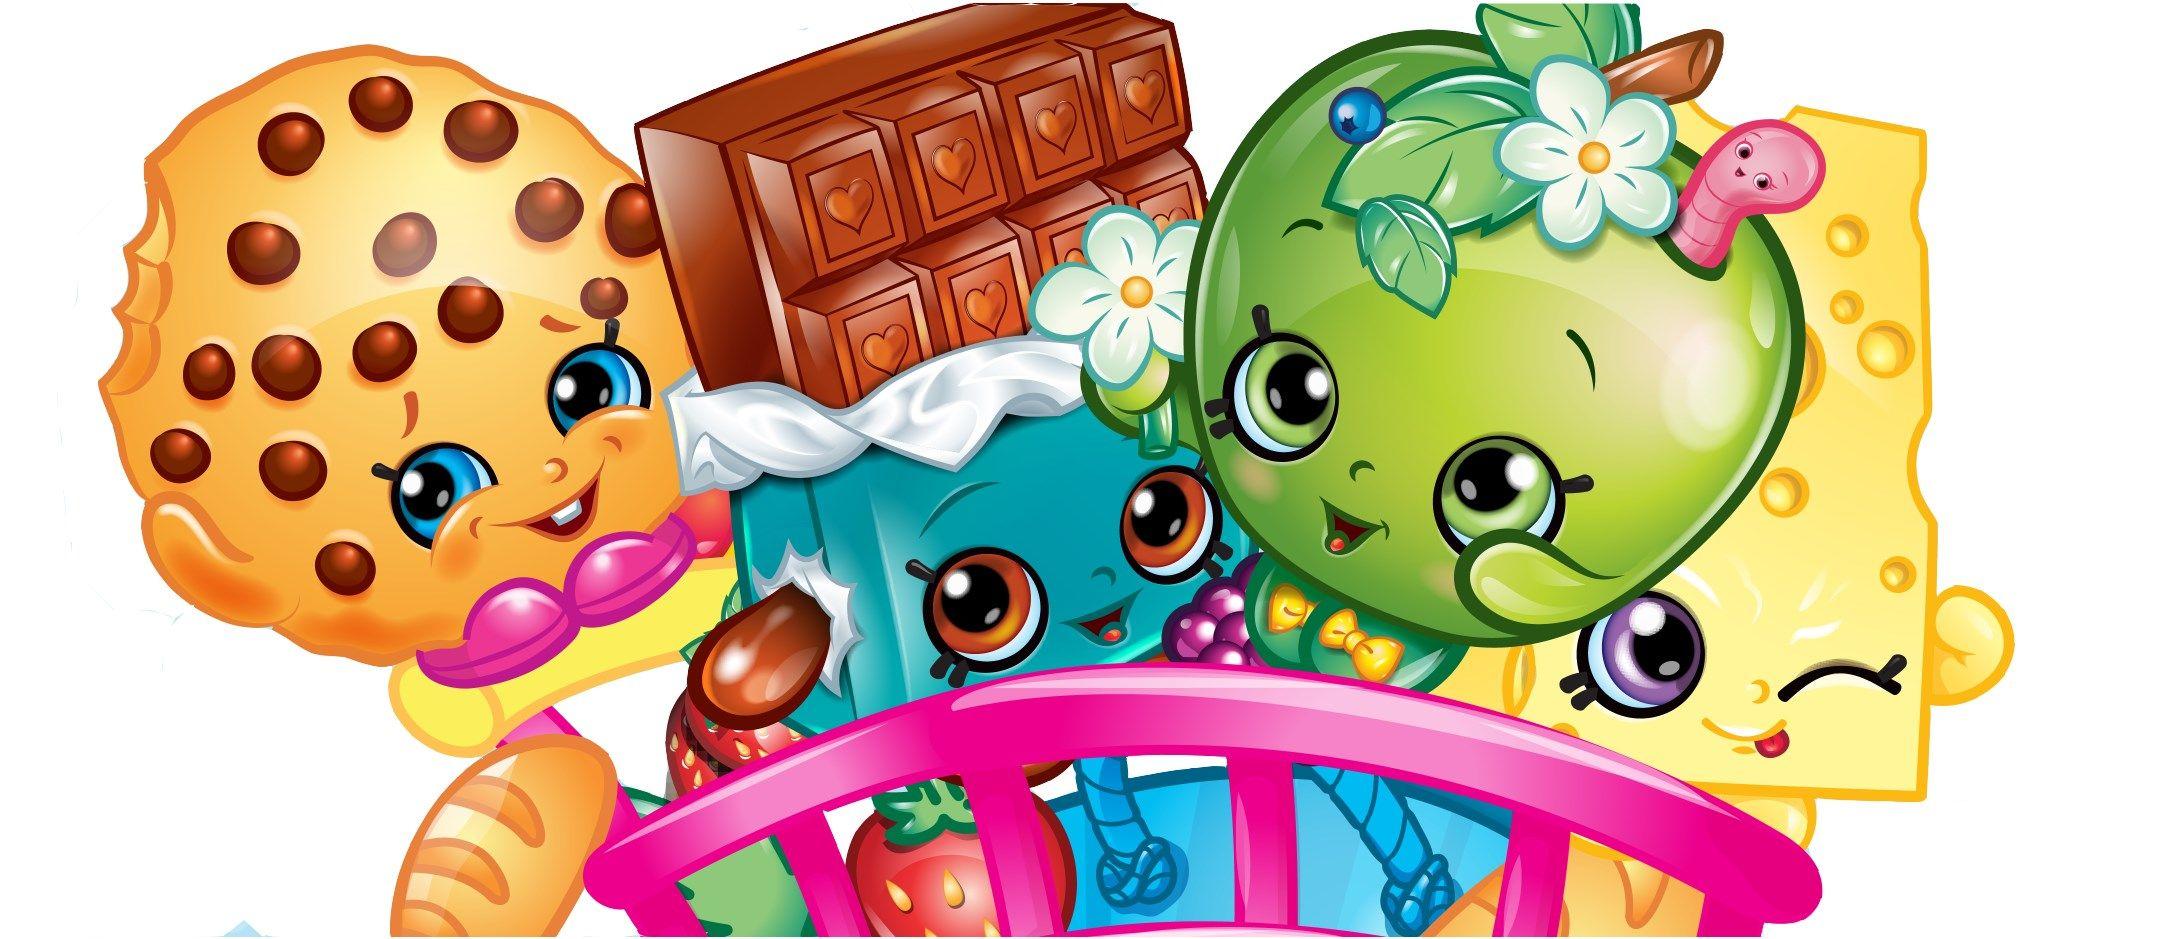 shopkins wallpaper for iphone Wallppapers Gallery